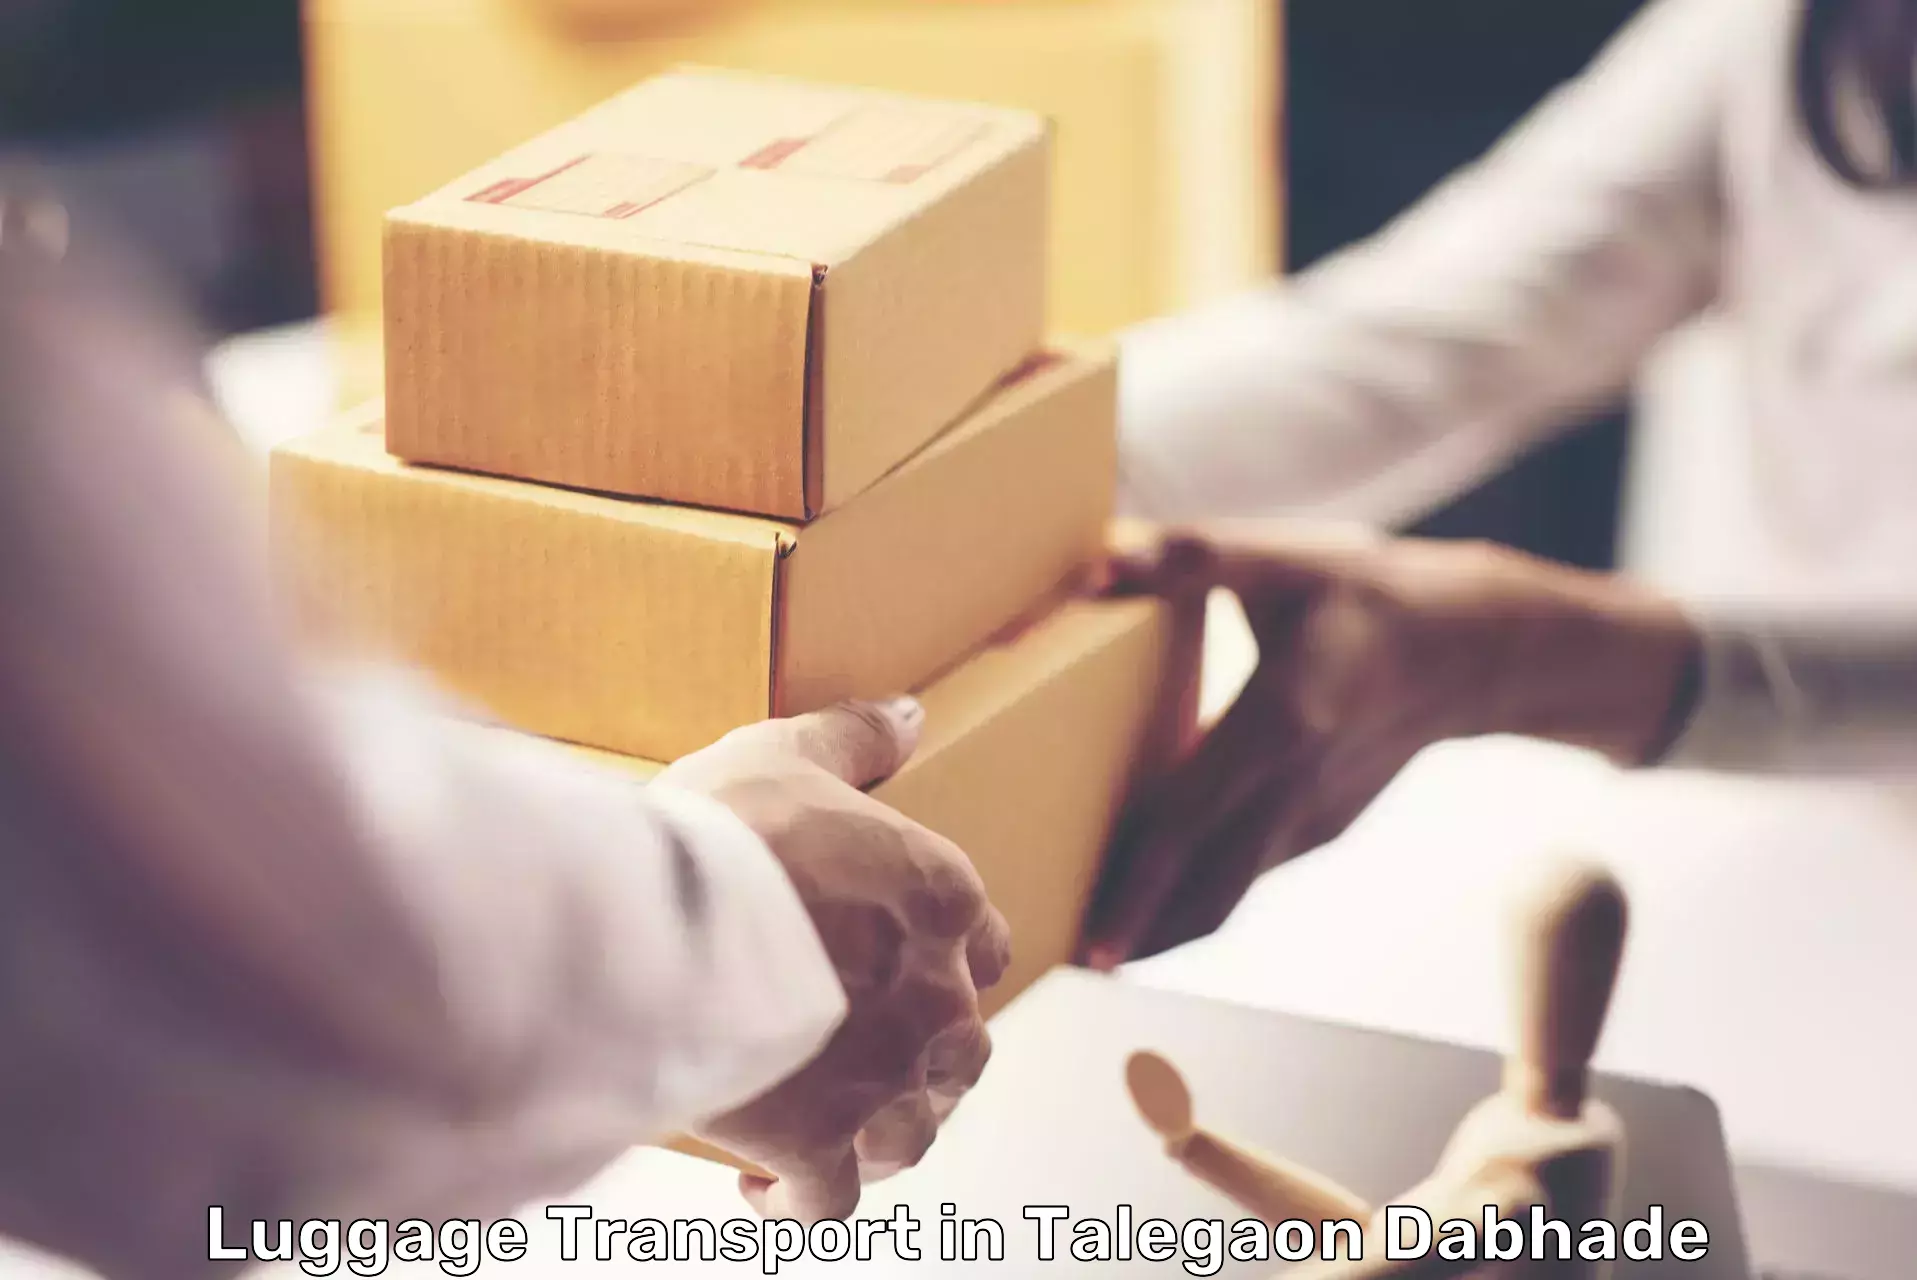 Professional baggage transport in Talegaon Dabhade